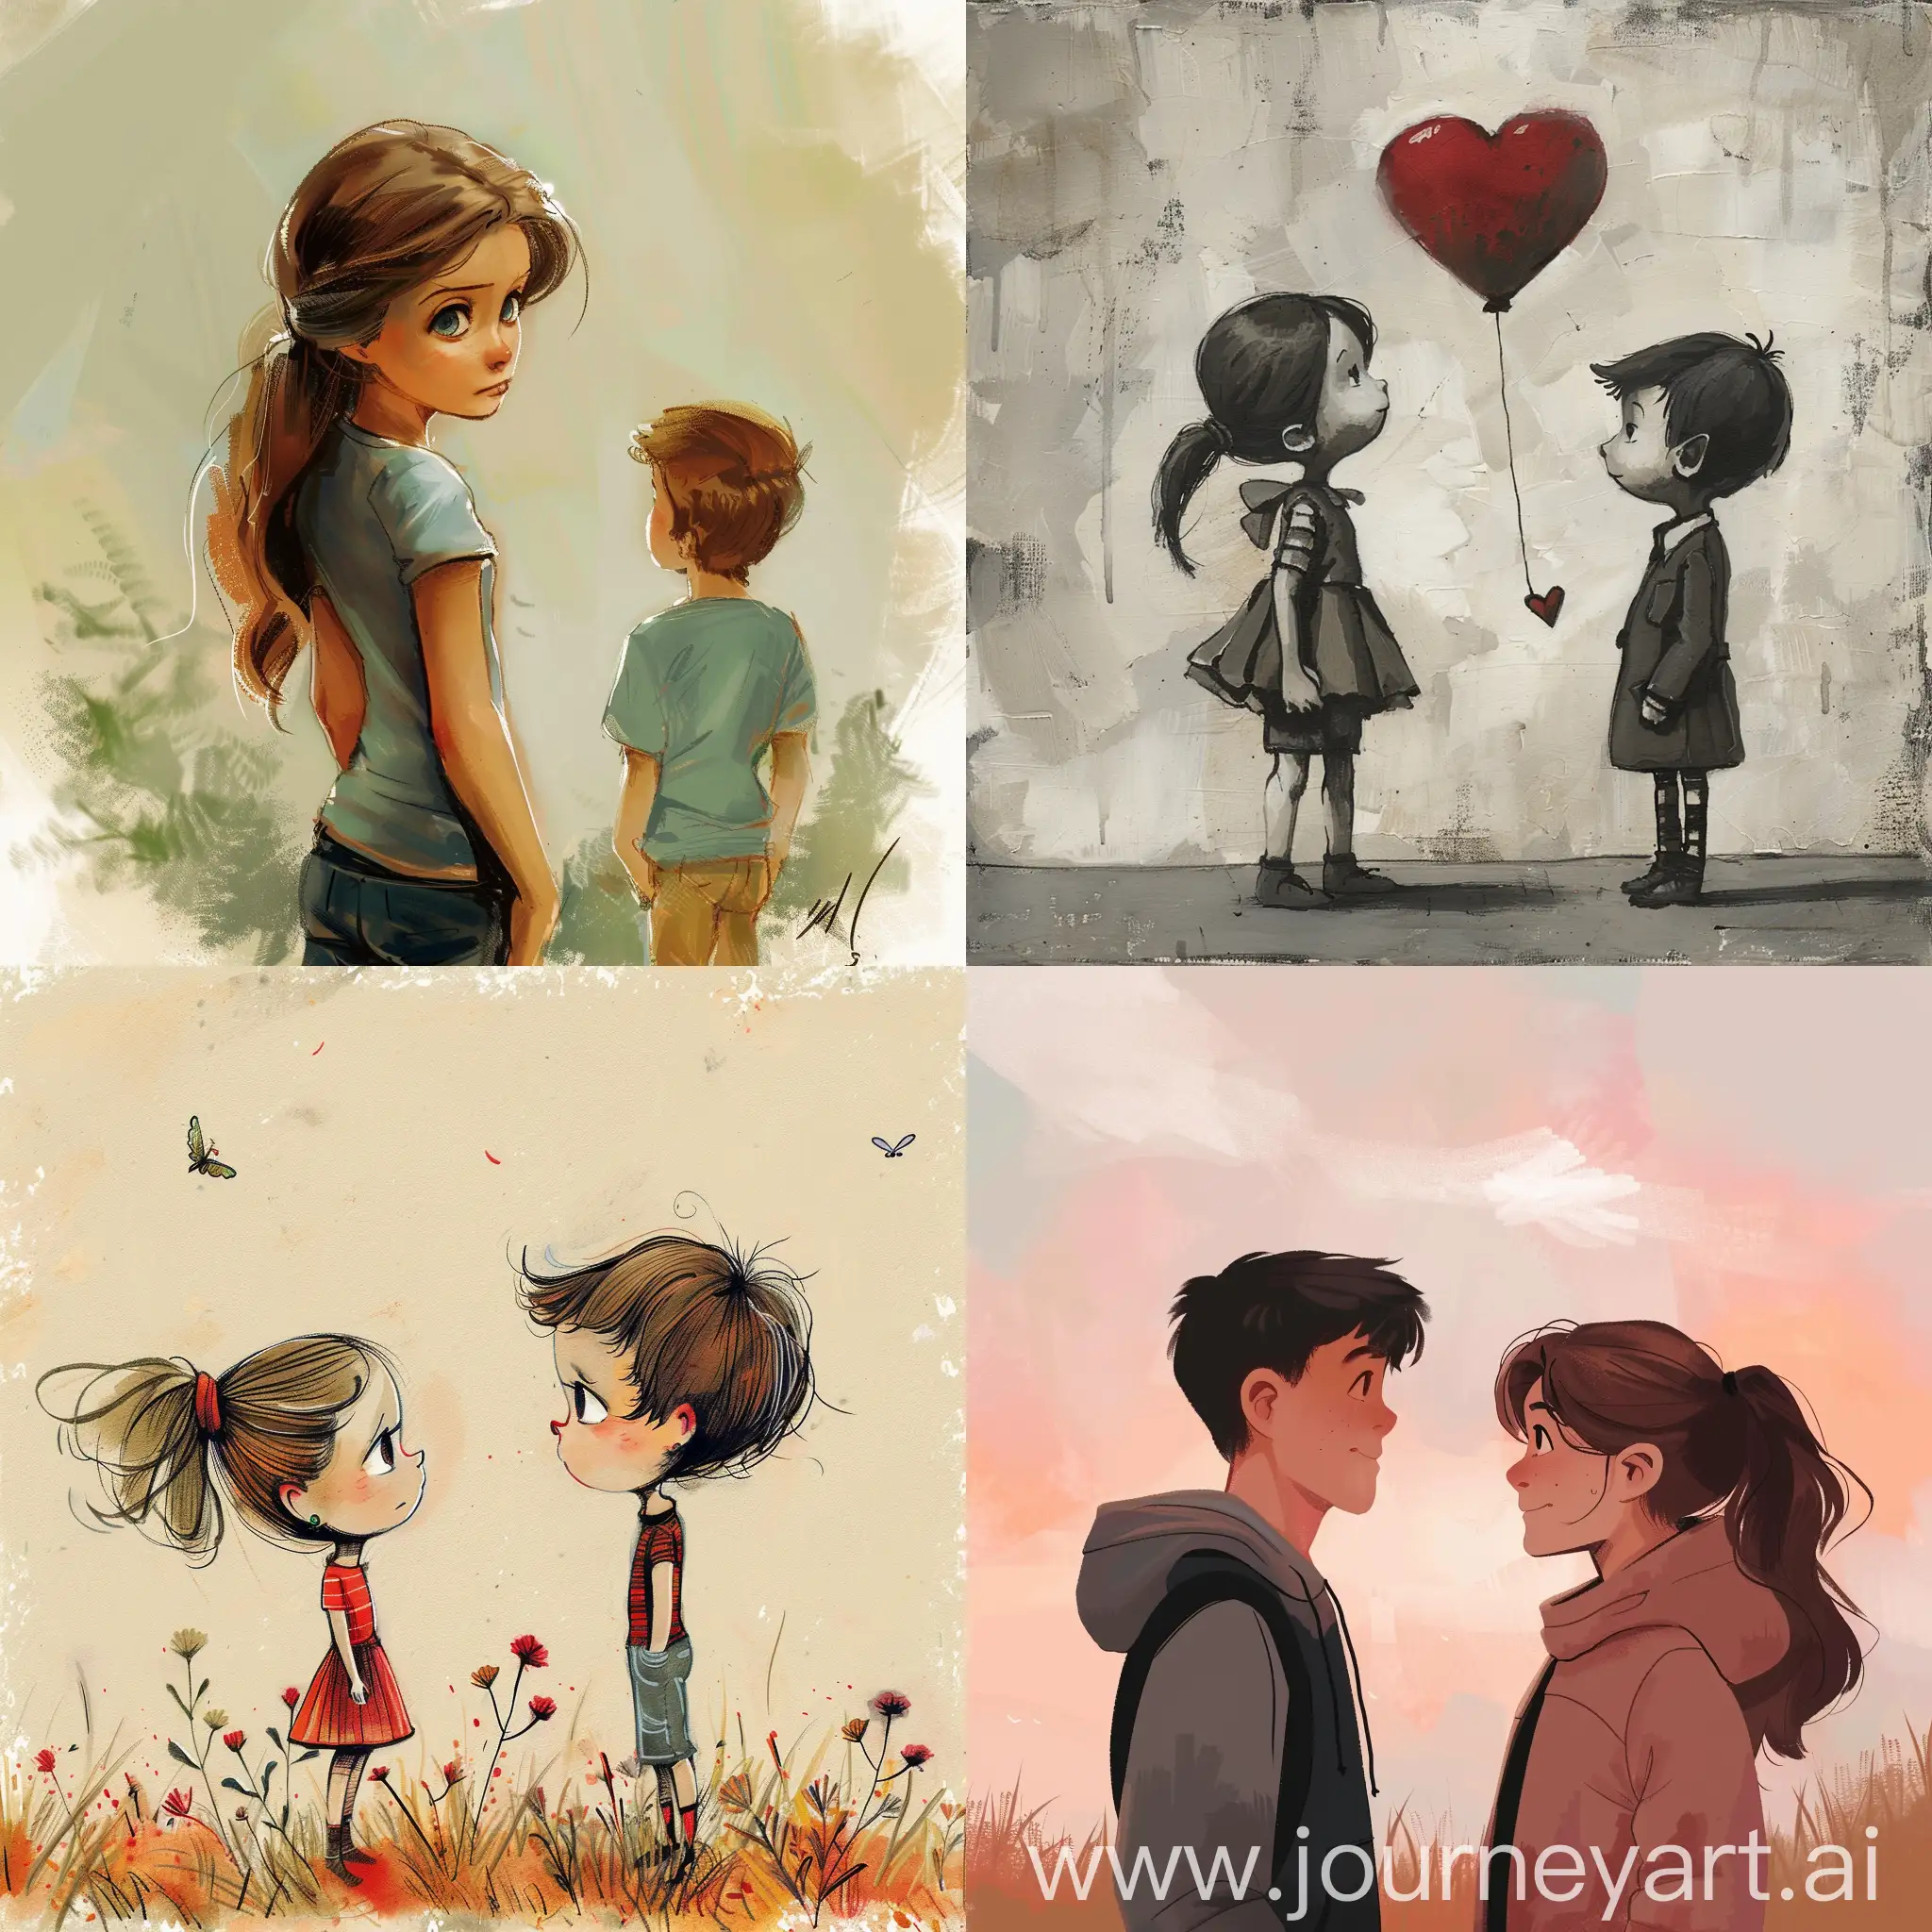 Adolescent-Romance-Girl-Expressing-Affection-for-Boy-in-a-Square-Frame